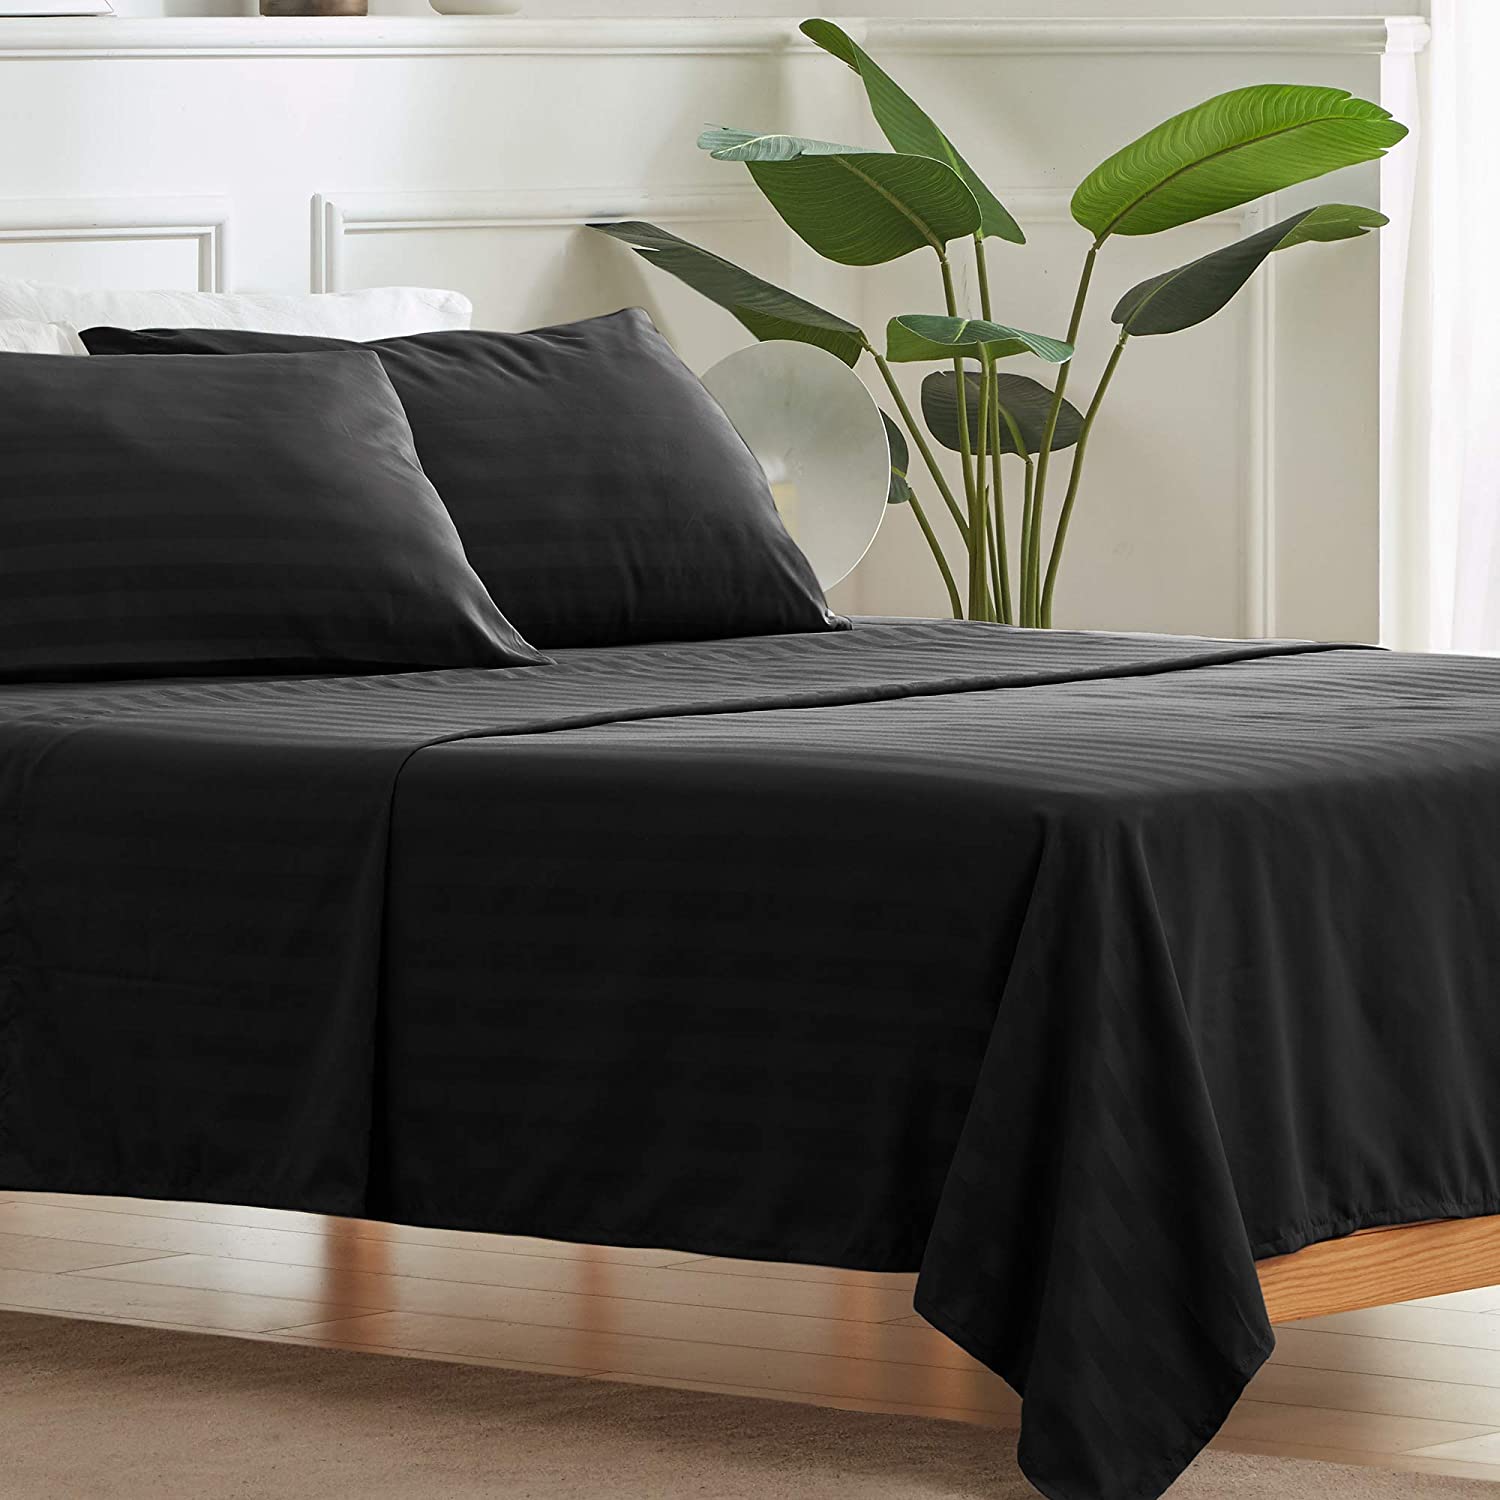 Details about   SLEEP ZONE Striped Bed Sheet Sets 120gsm Luxury Microfiber Temperature Regulatio 